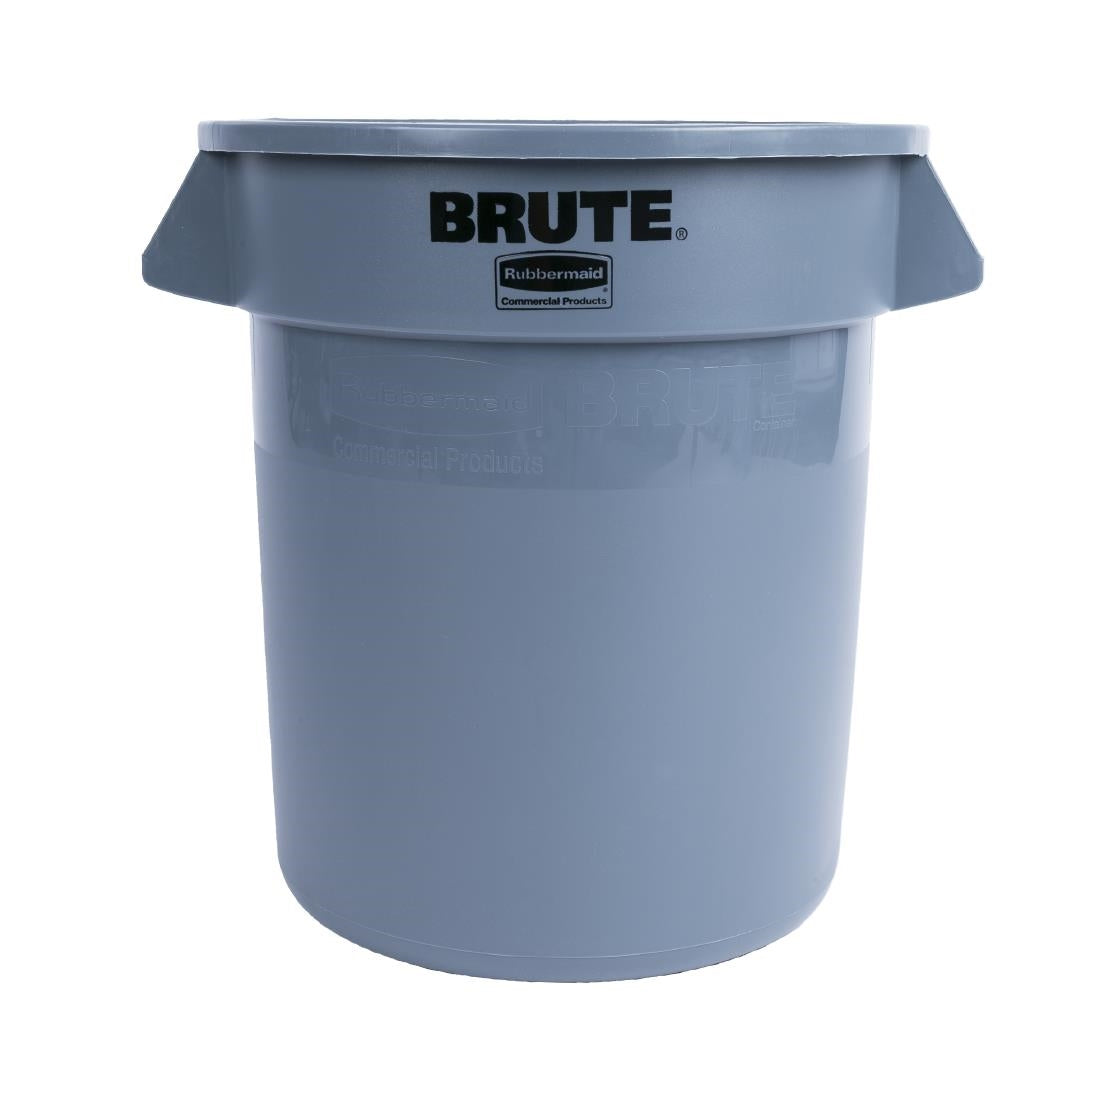 L639 Rubbermaid Brute Utility Container 37.9Ltr Grey JD Catering Equipment Solutions Ltd